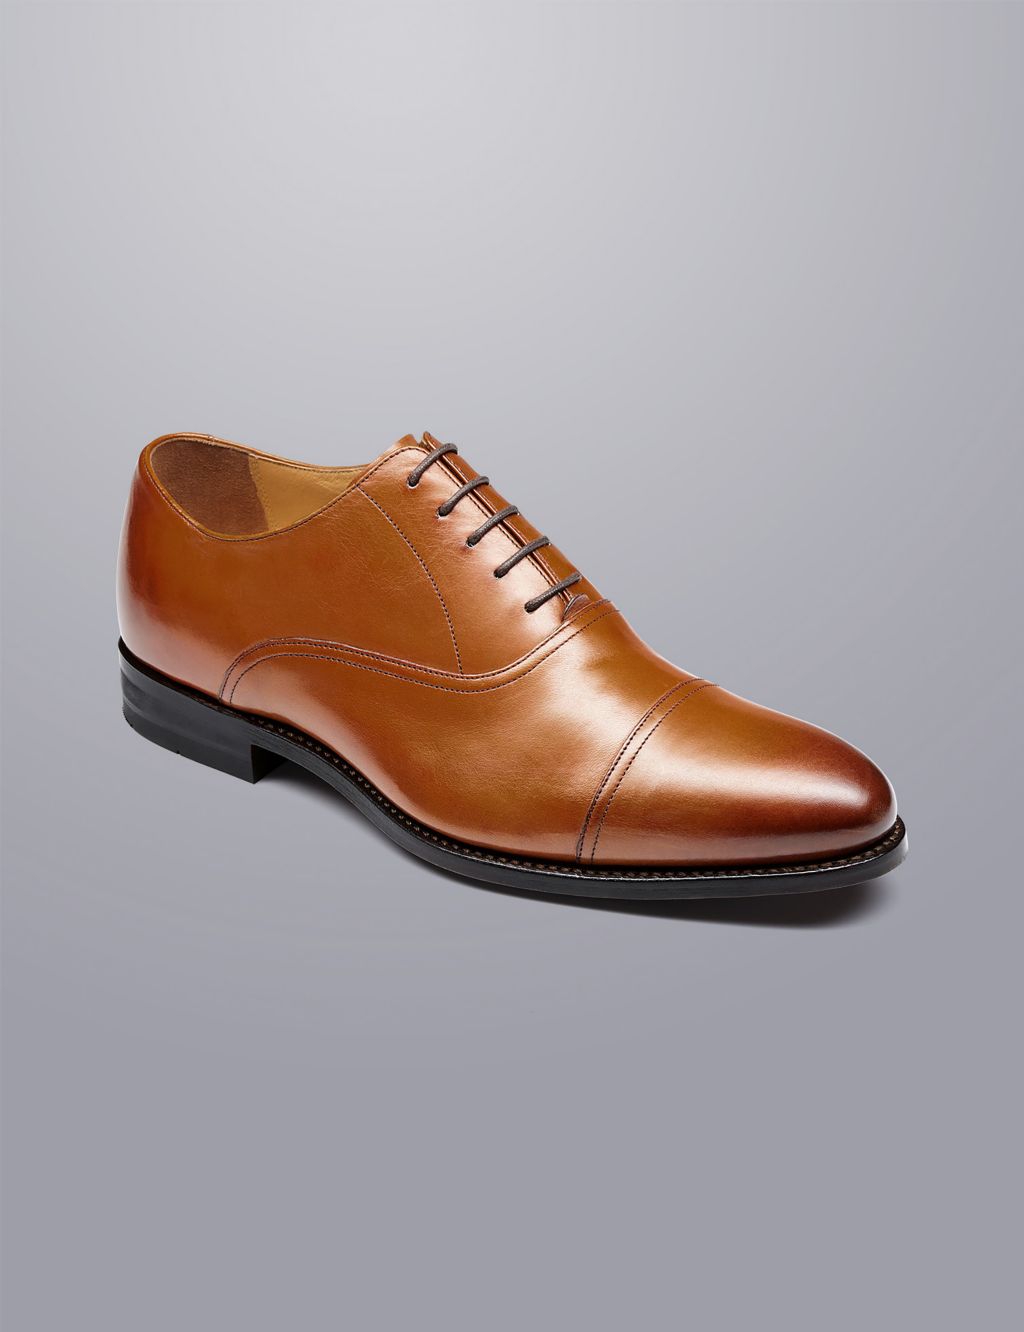 Leather Oxford Shoes image 3